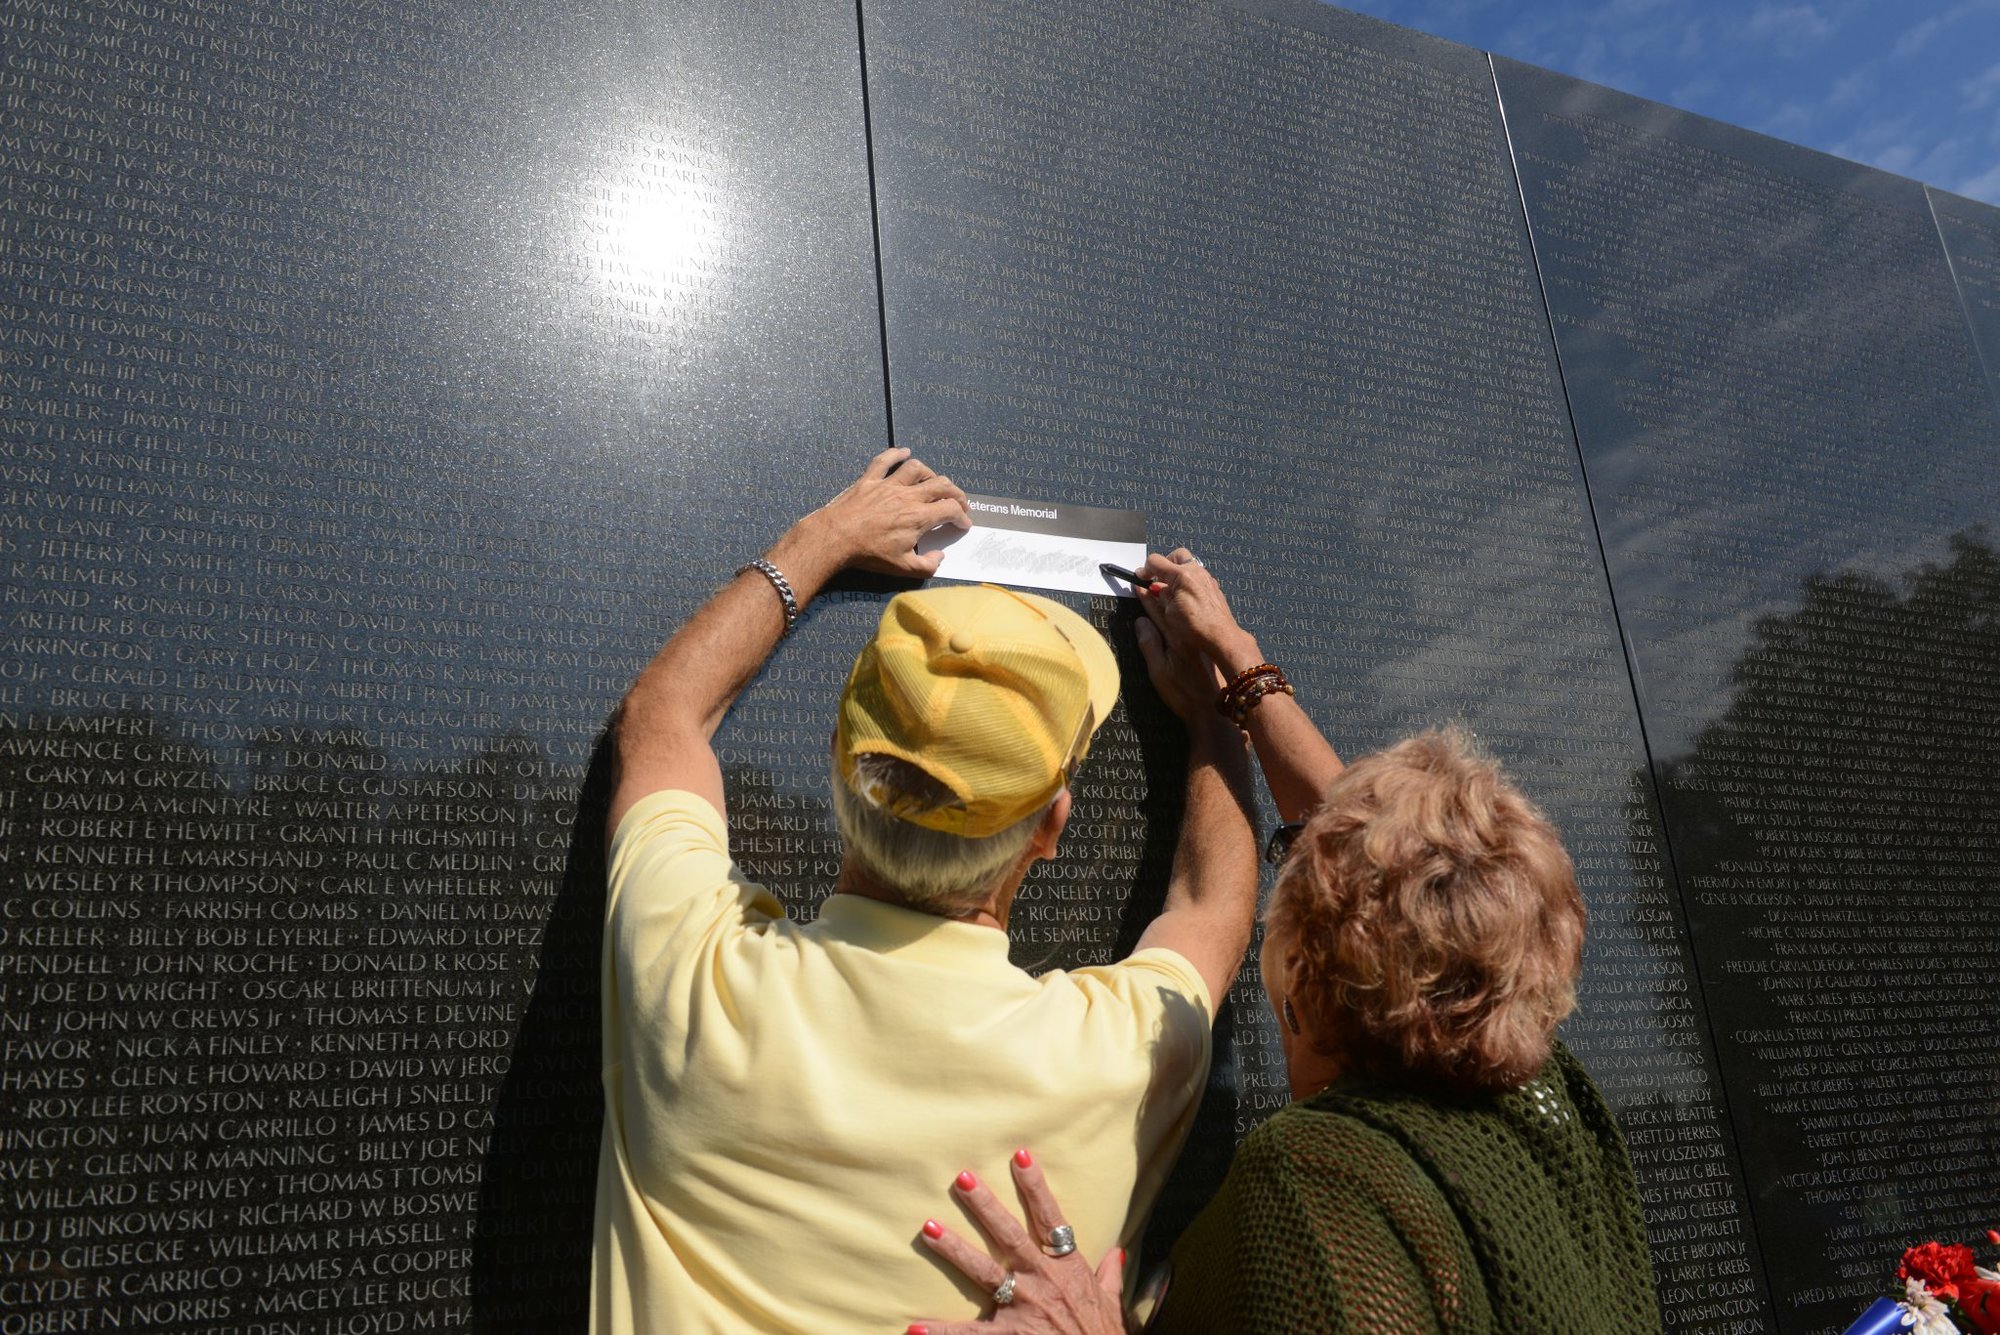 National Park Service volunteer Donald Adam helps Karen McCaslin make a rubbing of her brother’s name, Donald P. Sloat, at the Vietnam Veterans Memorial in Washington, D.C., Sept. 17, 2014. Sloat, who was an Army specialist four, was killed in action in 1970 and was awarded the Medal of Honor on Sept. 15, 2014. (Army News Service photograph by Lisa Ferdinando)